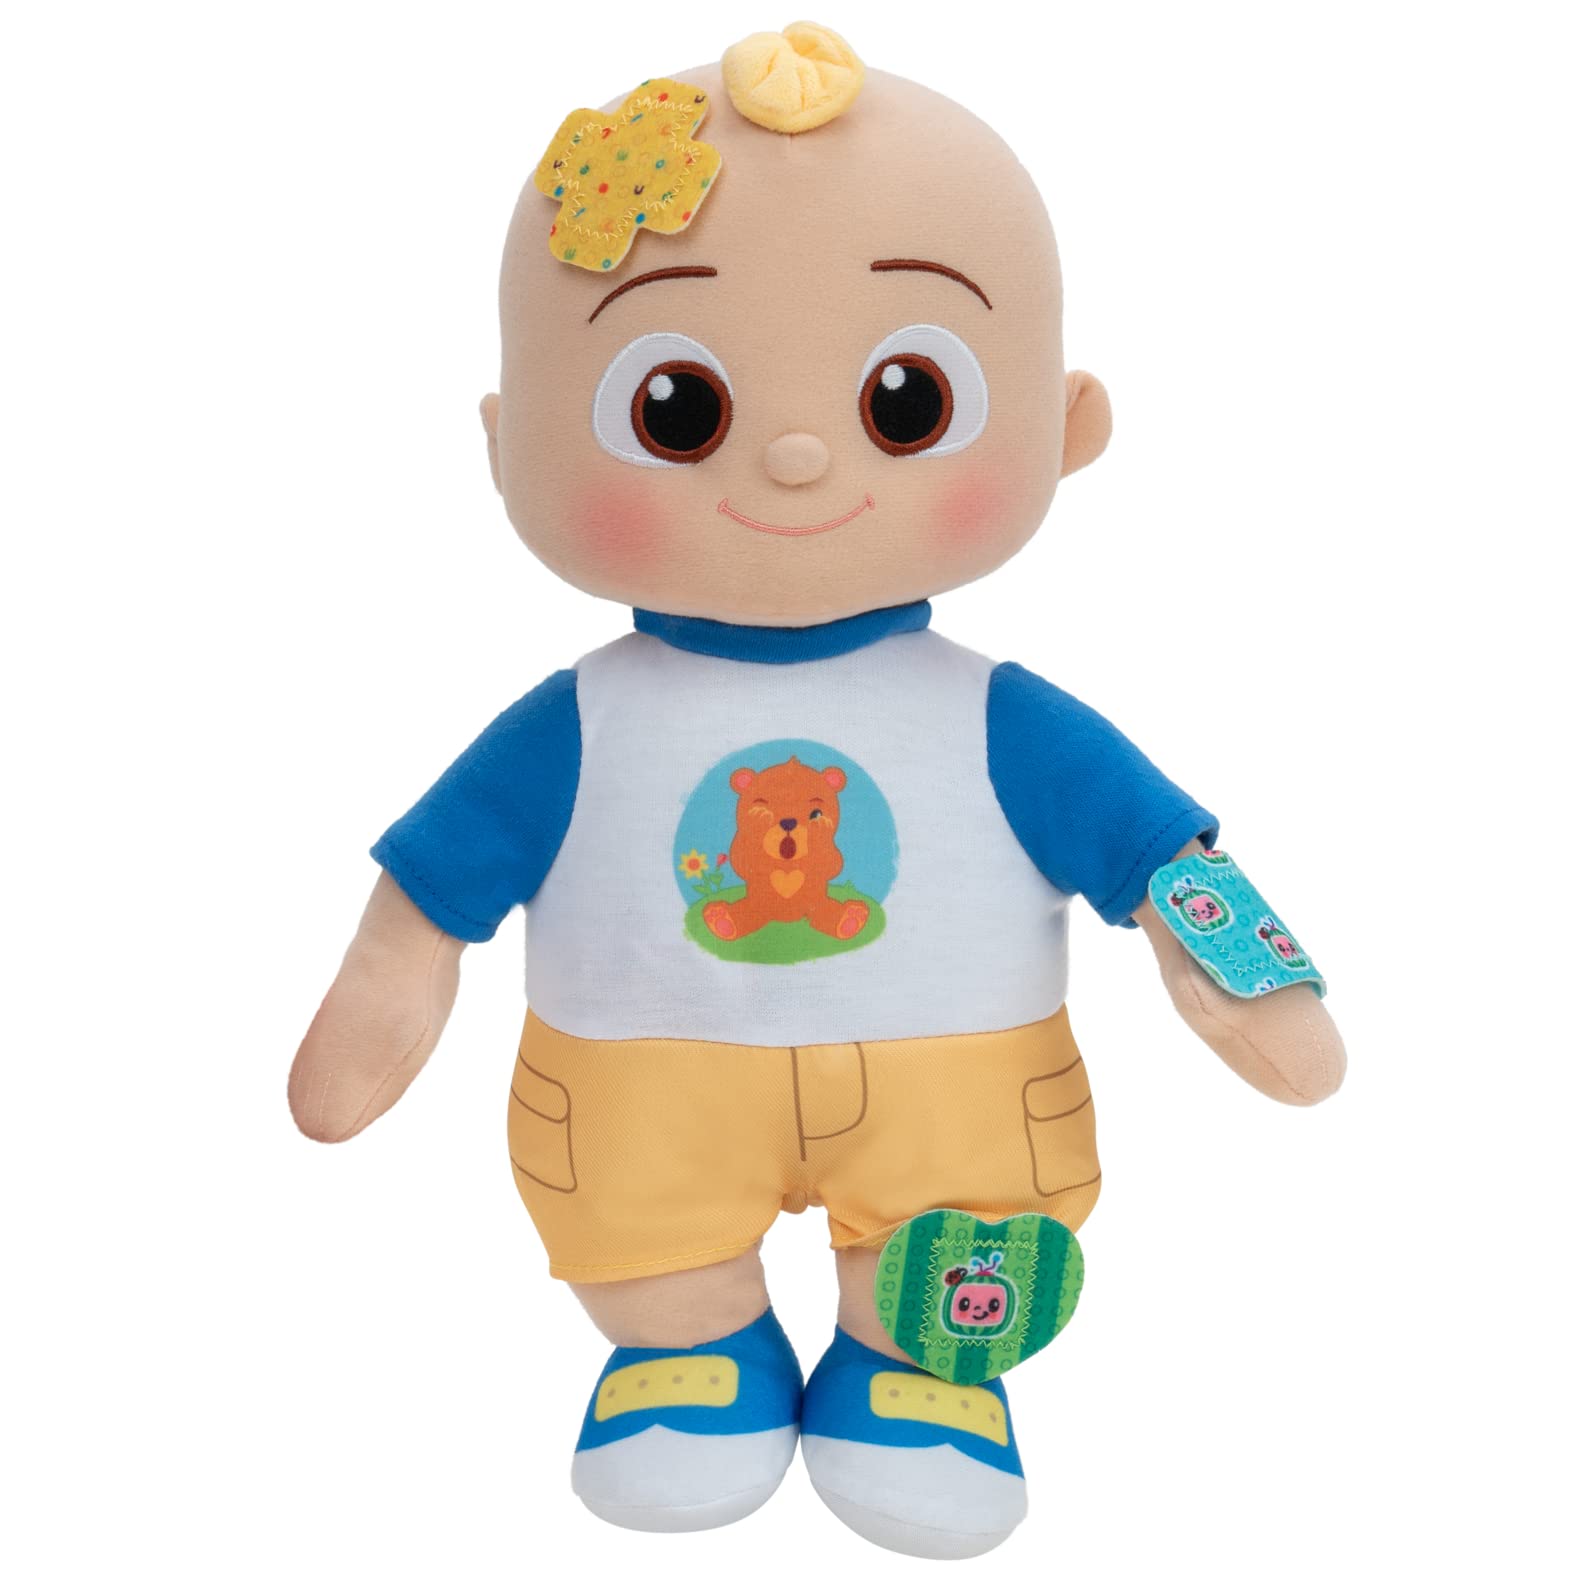 CoComelon Boo Boo JJ Deluxe Feature Plush - Includes Doctor Checkup Bag, Bandages, and Accessories to Care for JJ - 9 Total Accessories - Amazon Exclusive